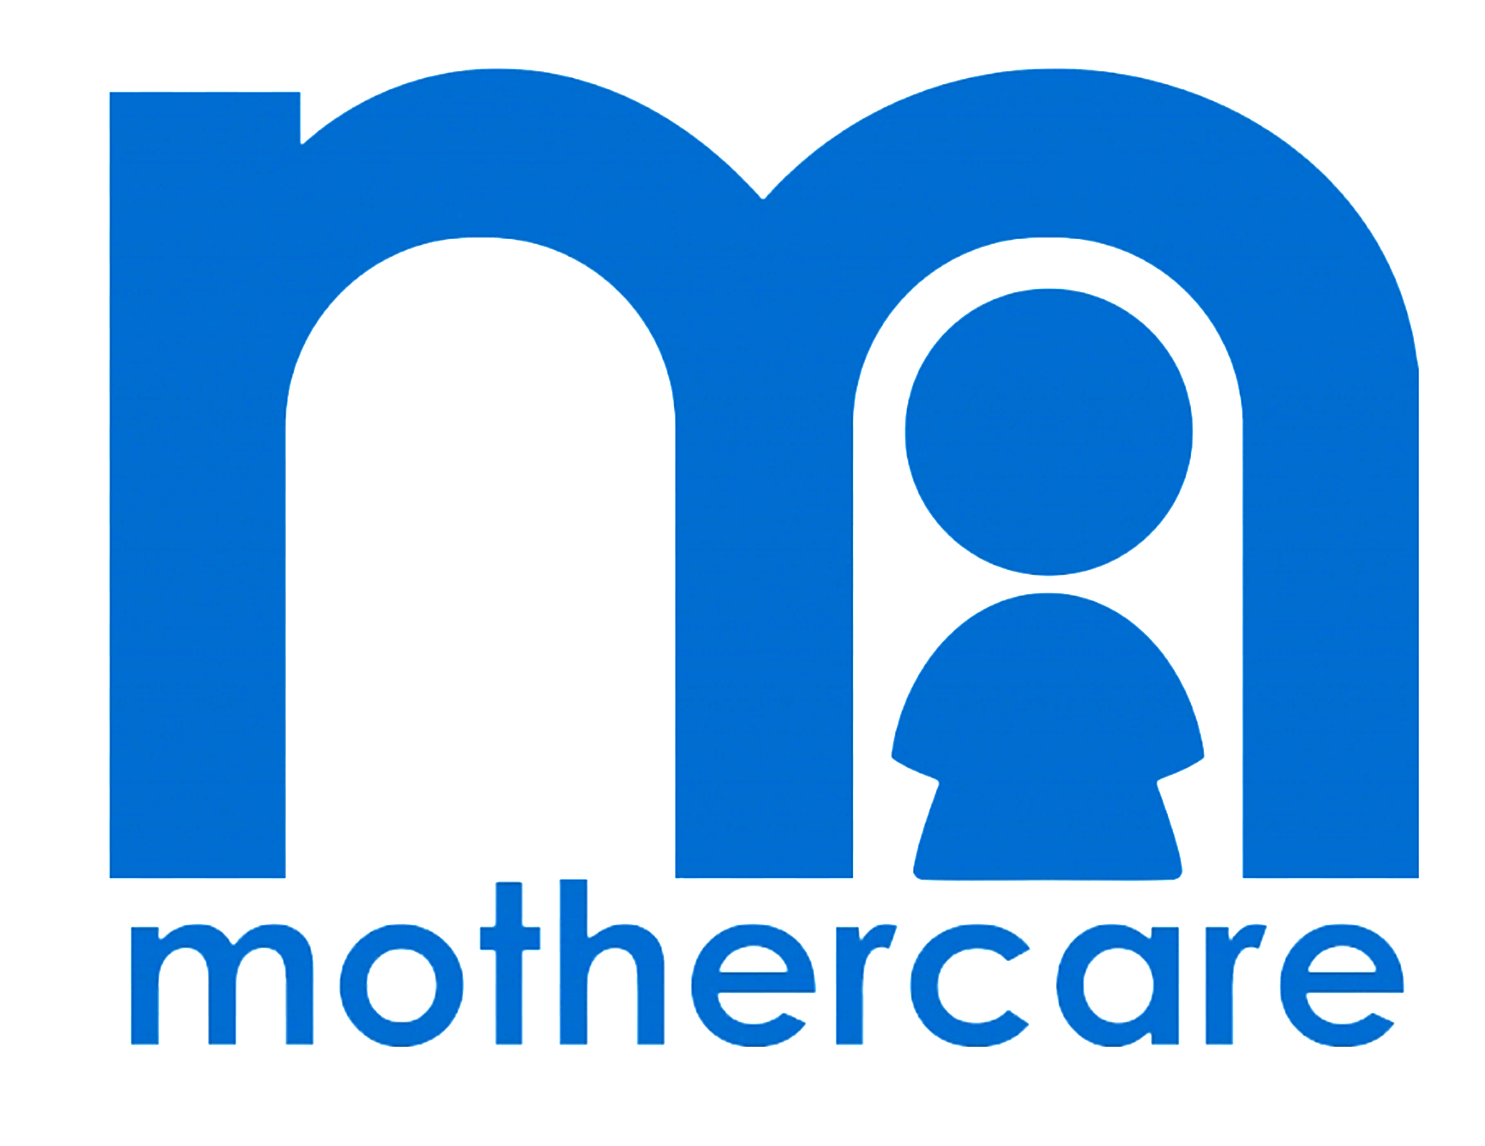 Buy Mothercare Baby Skincare Essentials Online in India at uyyaala.com